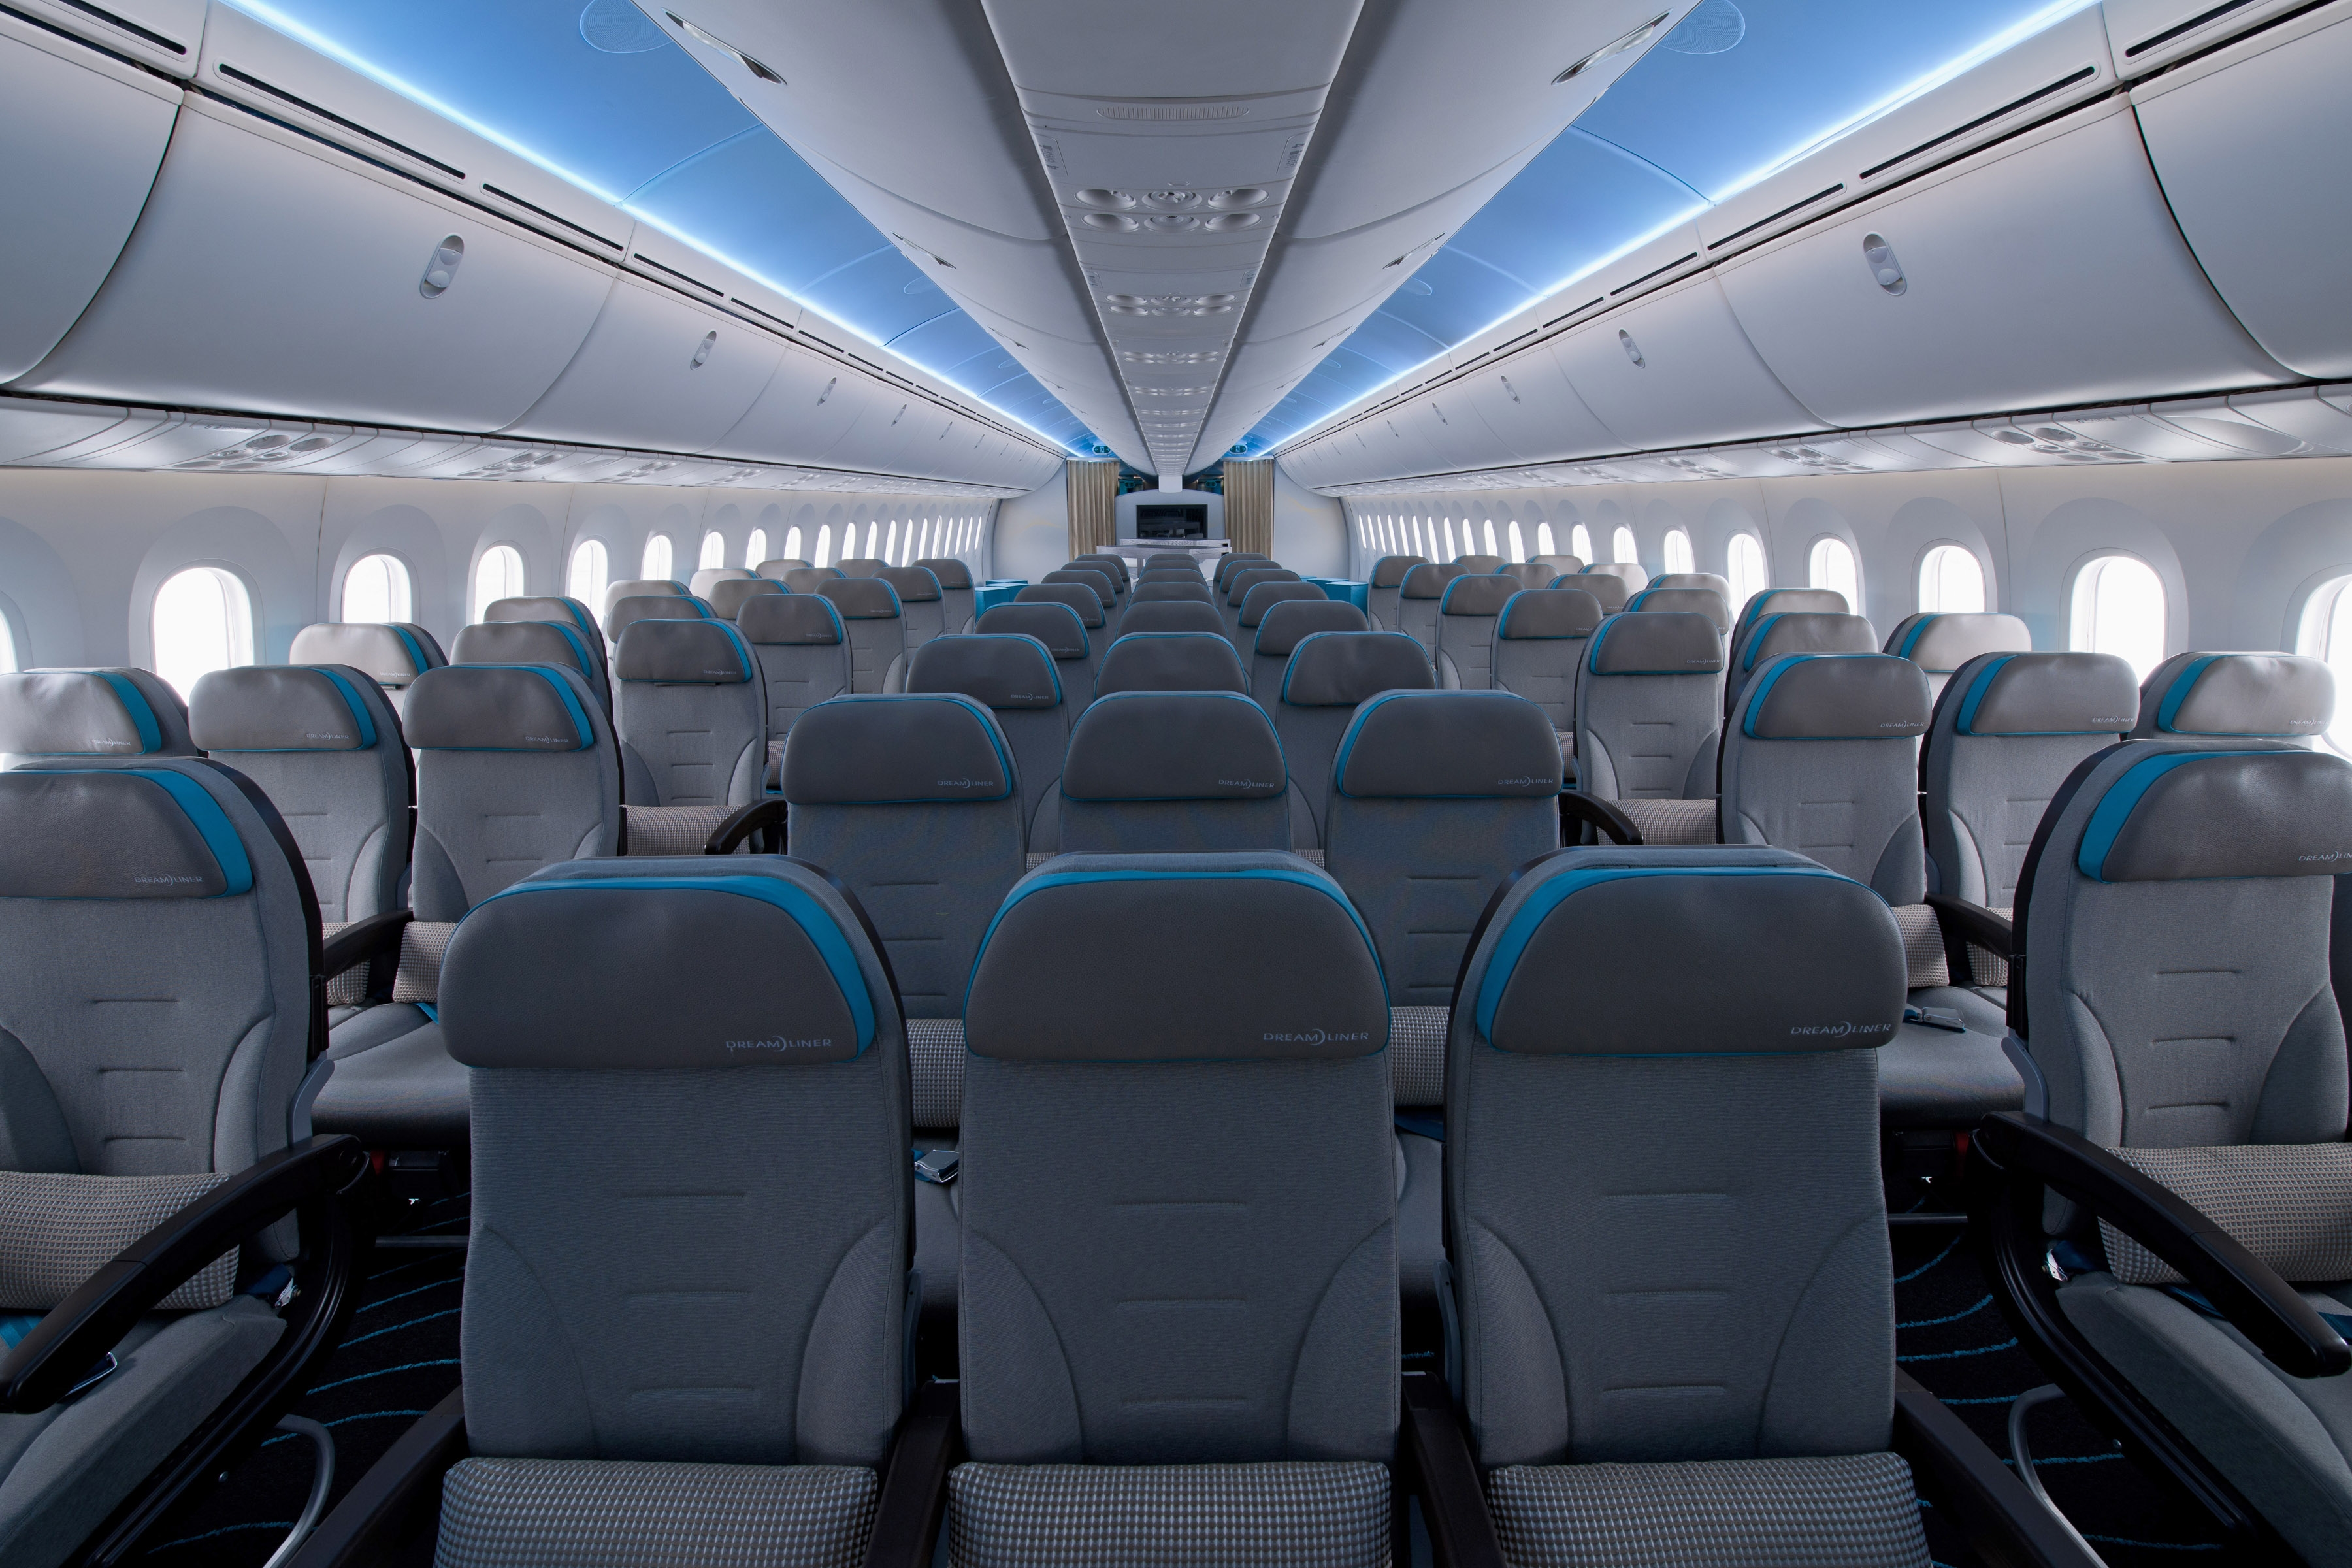 An Inside Look at the Third 787 Dreamliner's New Interior - AirlineReporter : AirlineReporter